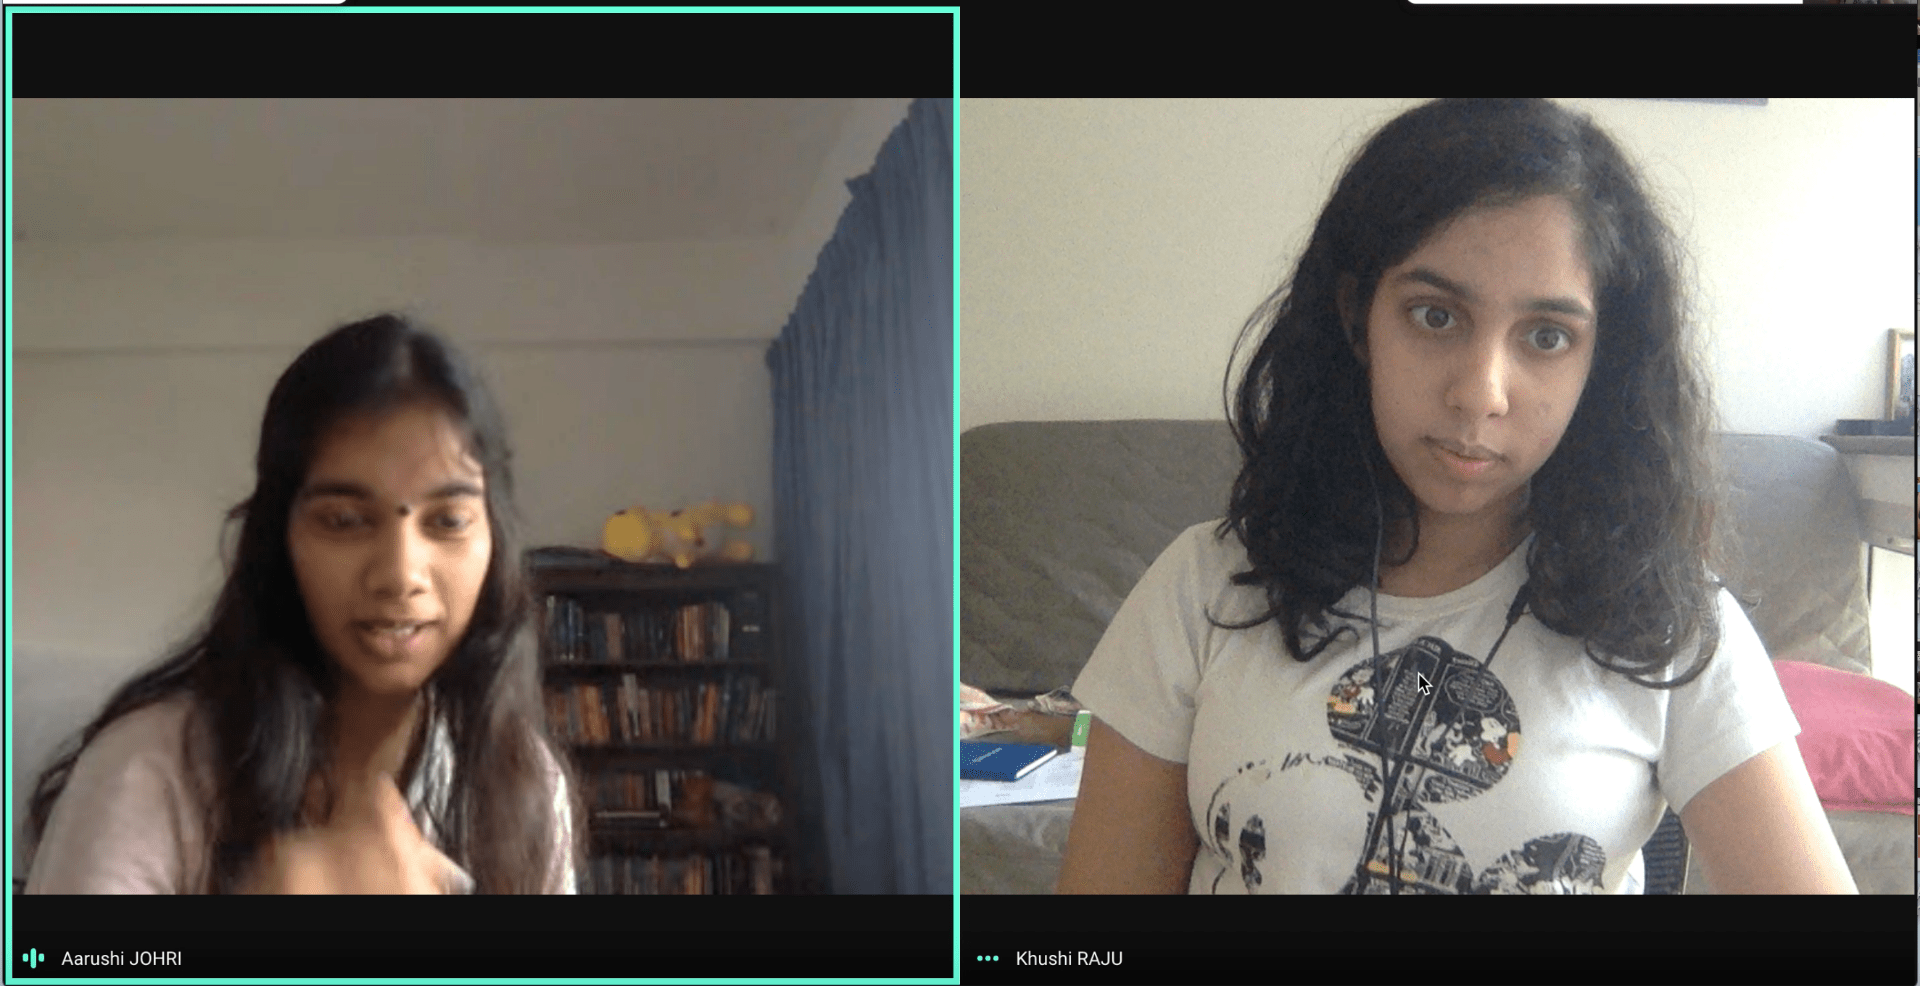 Khushi and Aarushi – Conversation about International Schools